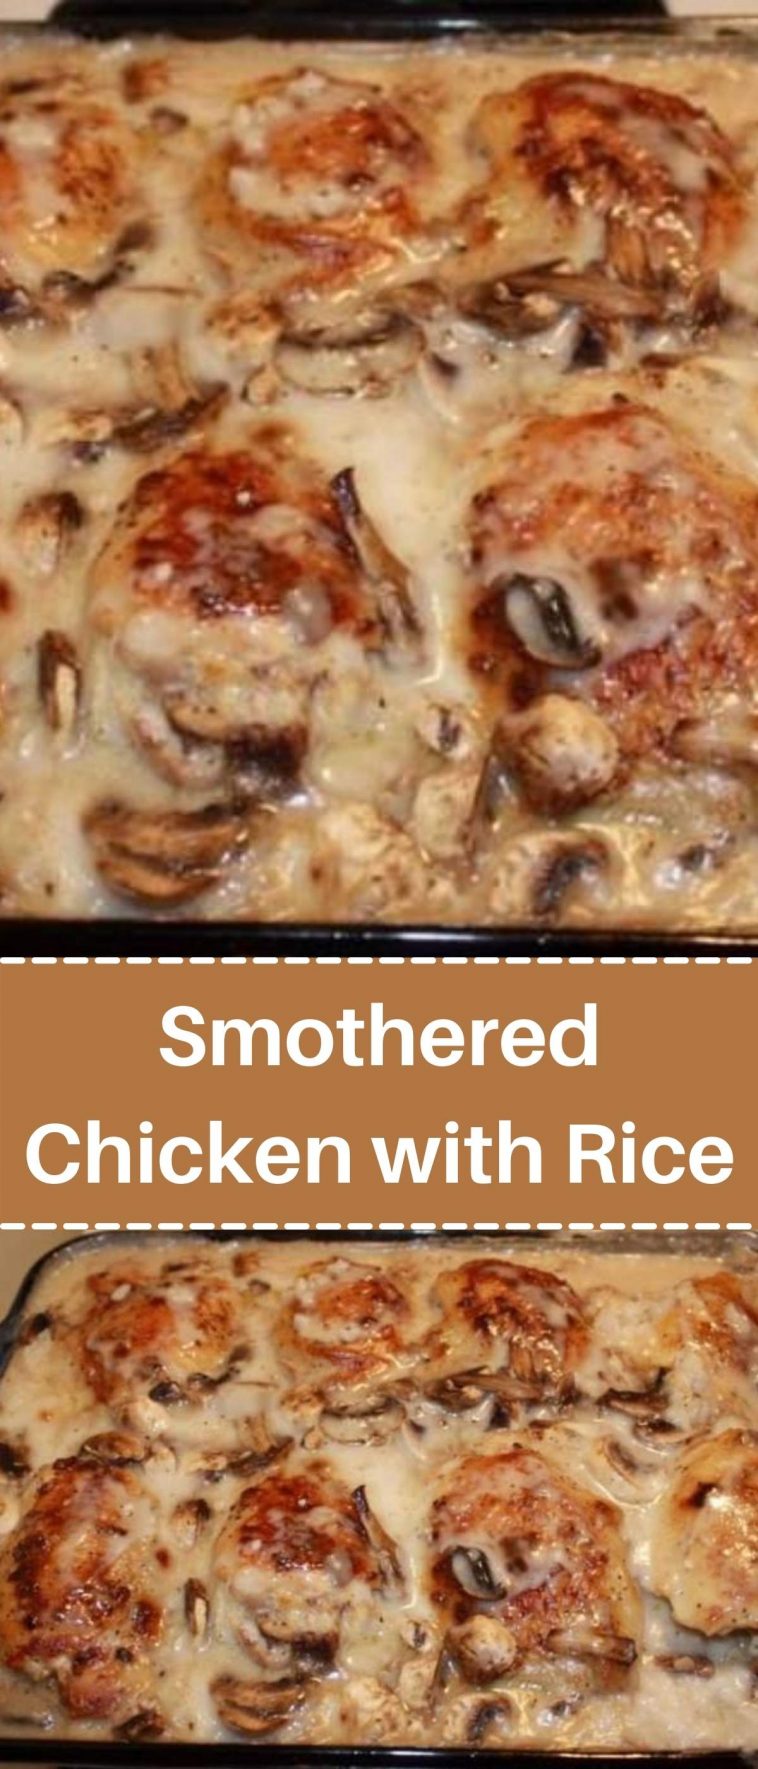 Smothered Chicken with Rice